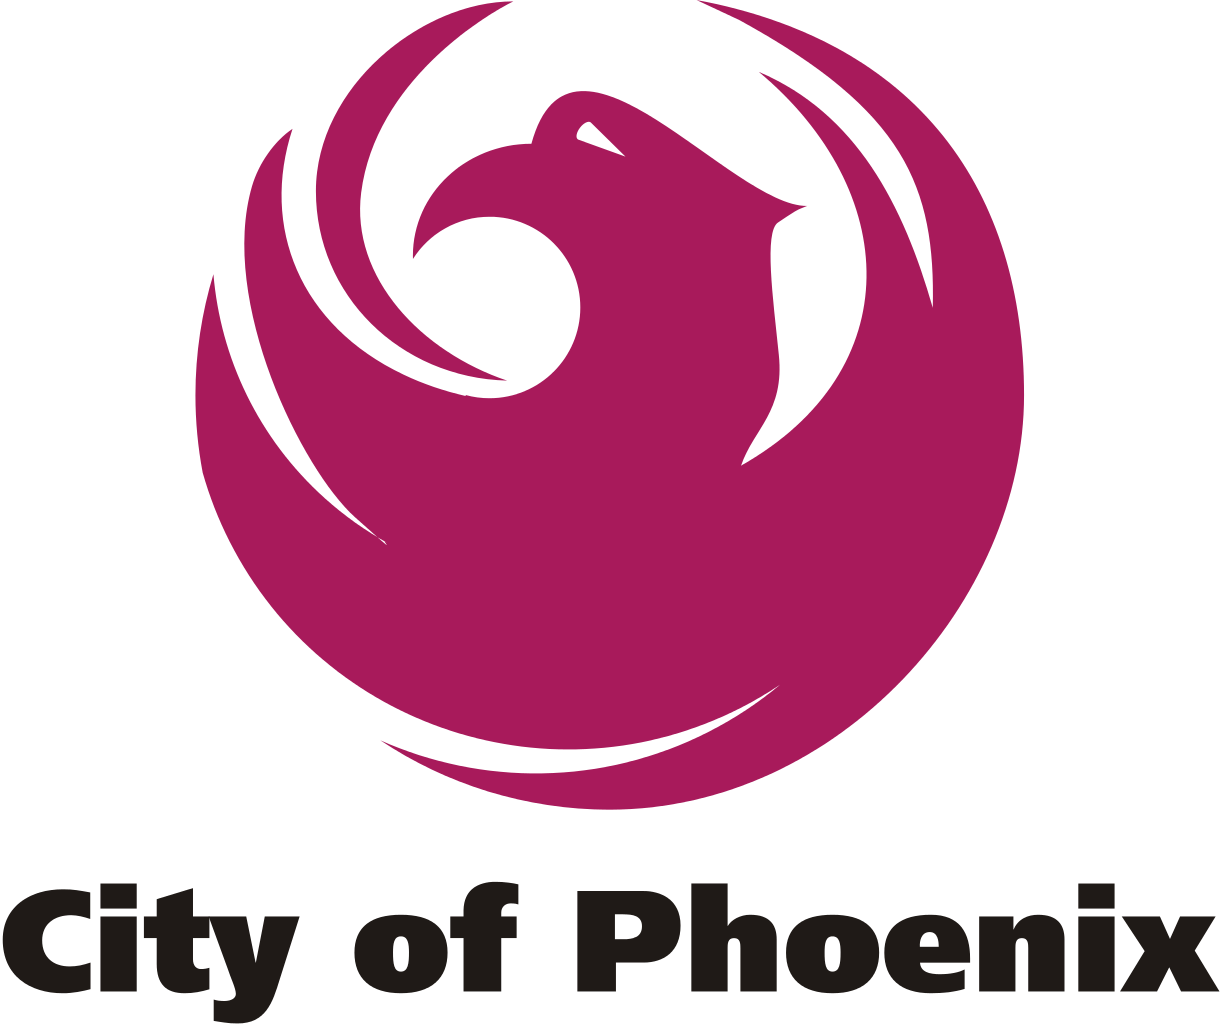 City of Phoenix Bird Logo - What's in a name: How the City of Phoenix really got its name ...